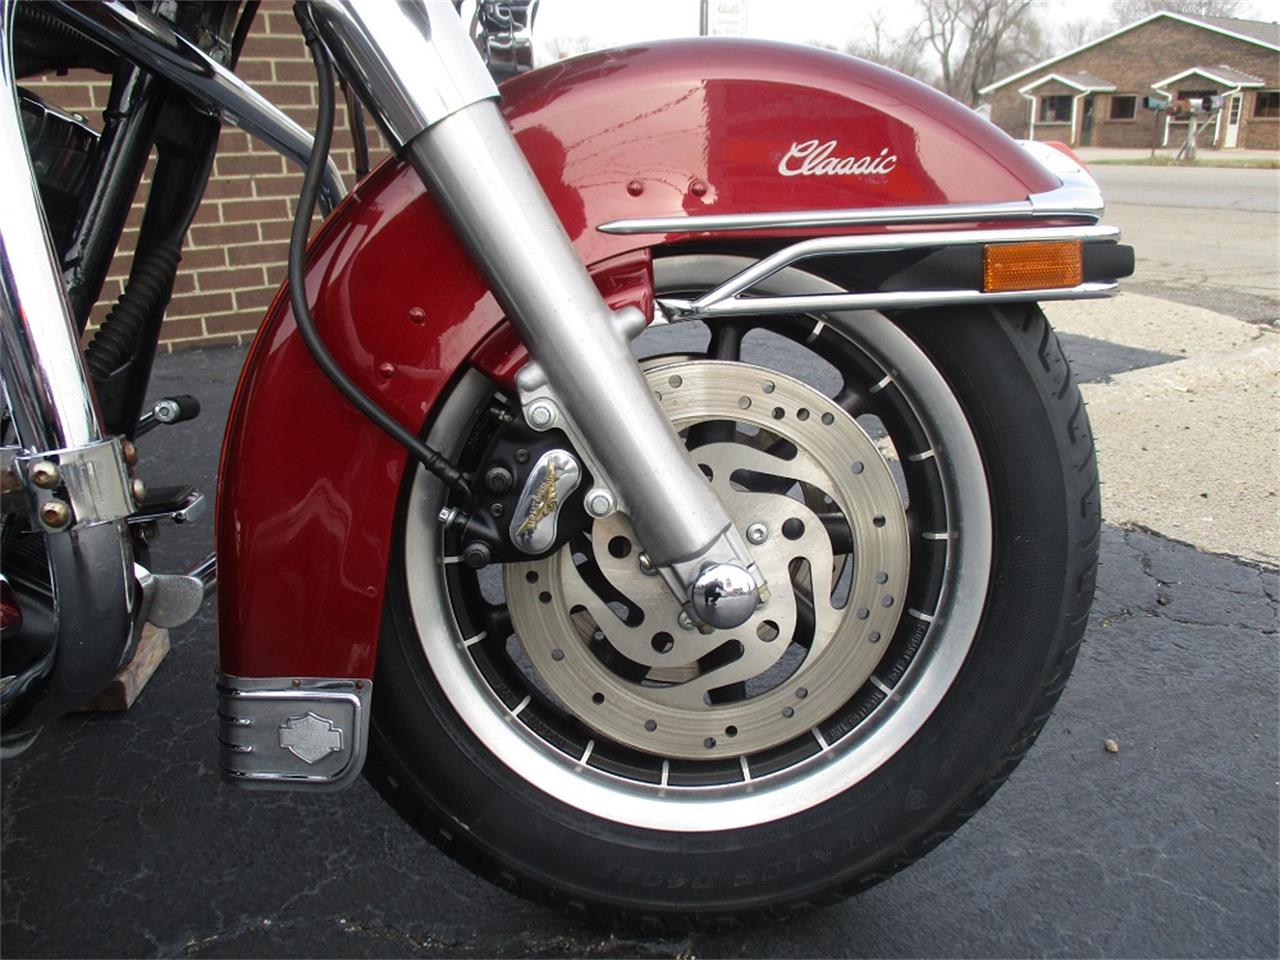 2001 Harley-Davidson Electra Glide for sale in Sterling, IL – photo 21